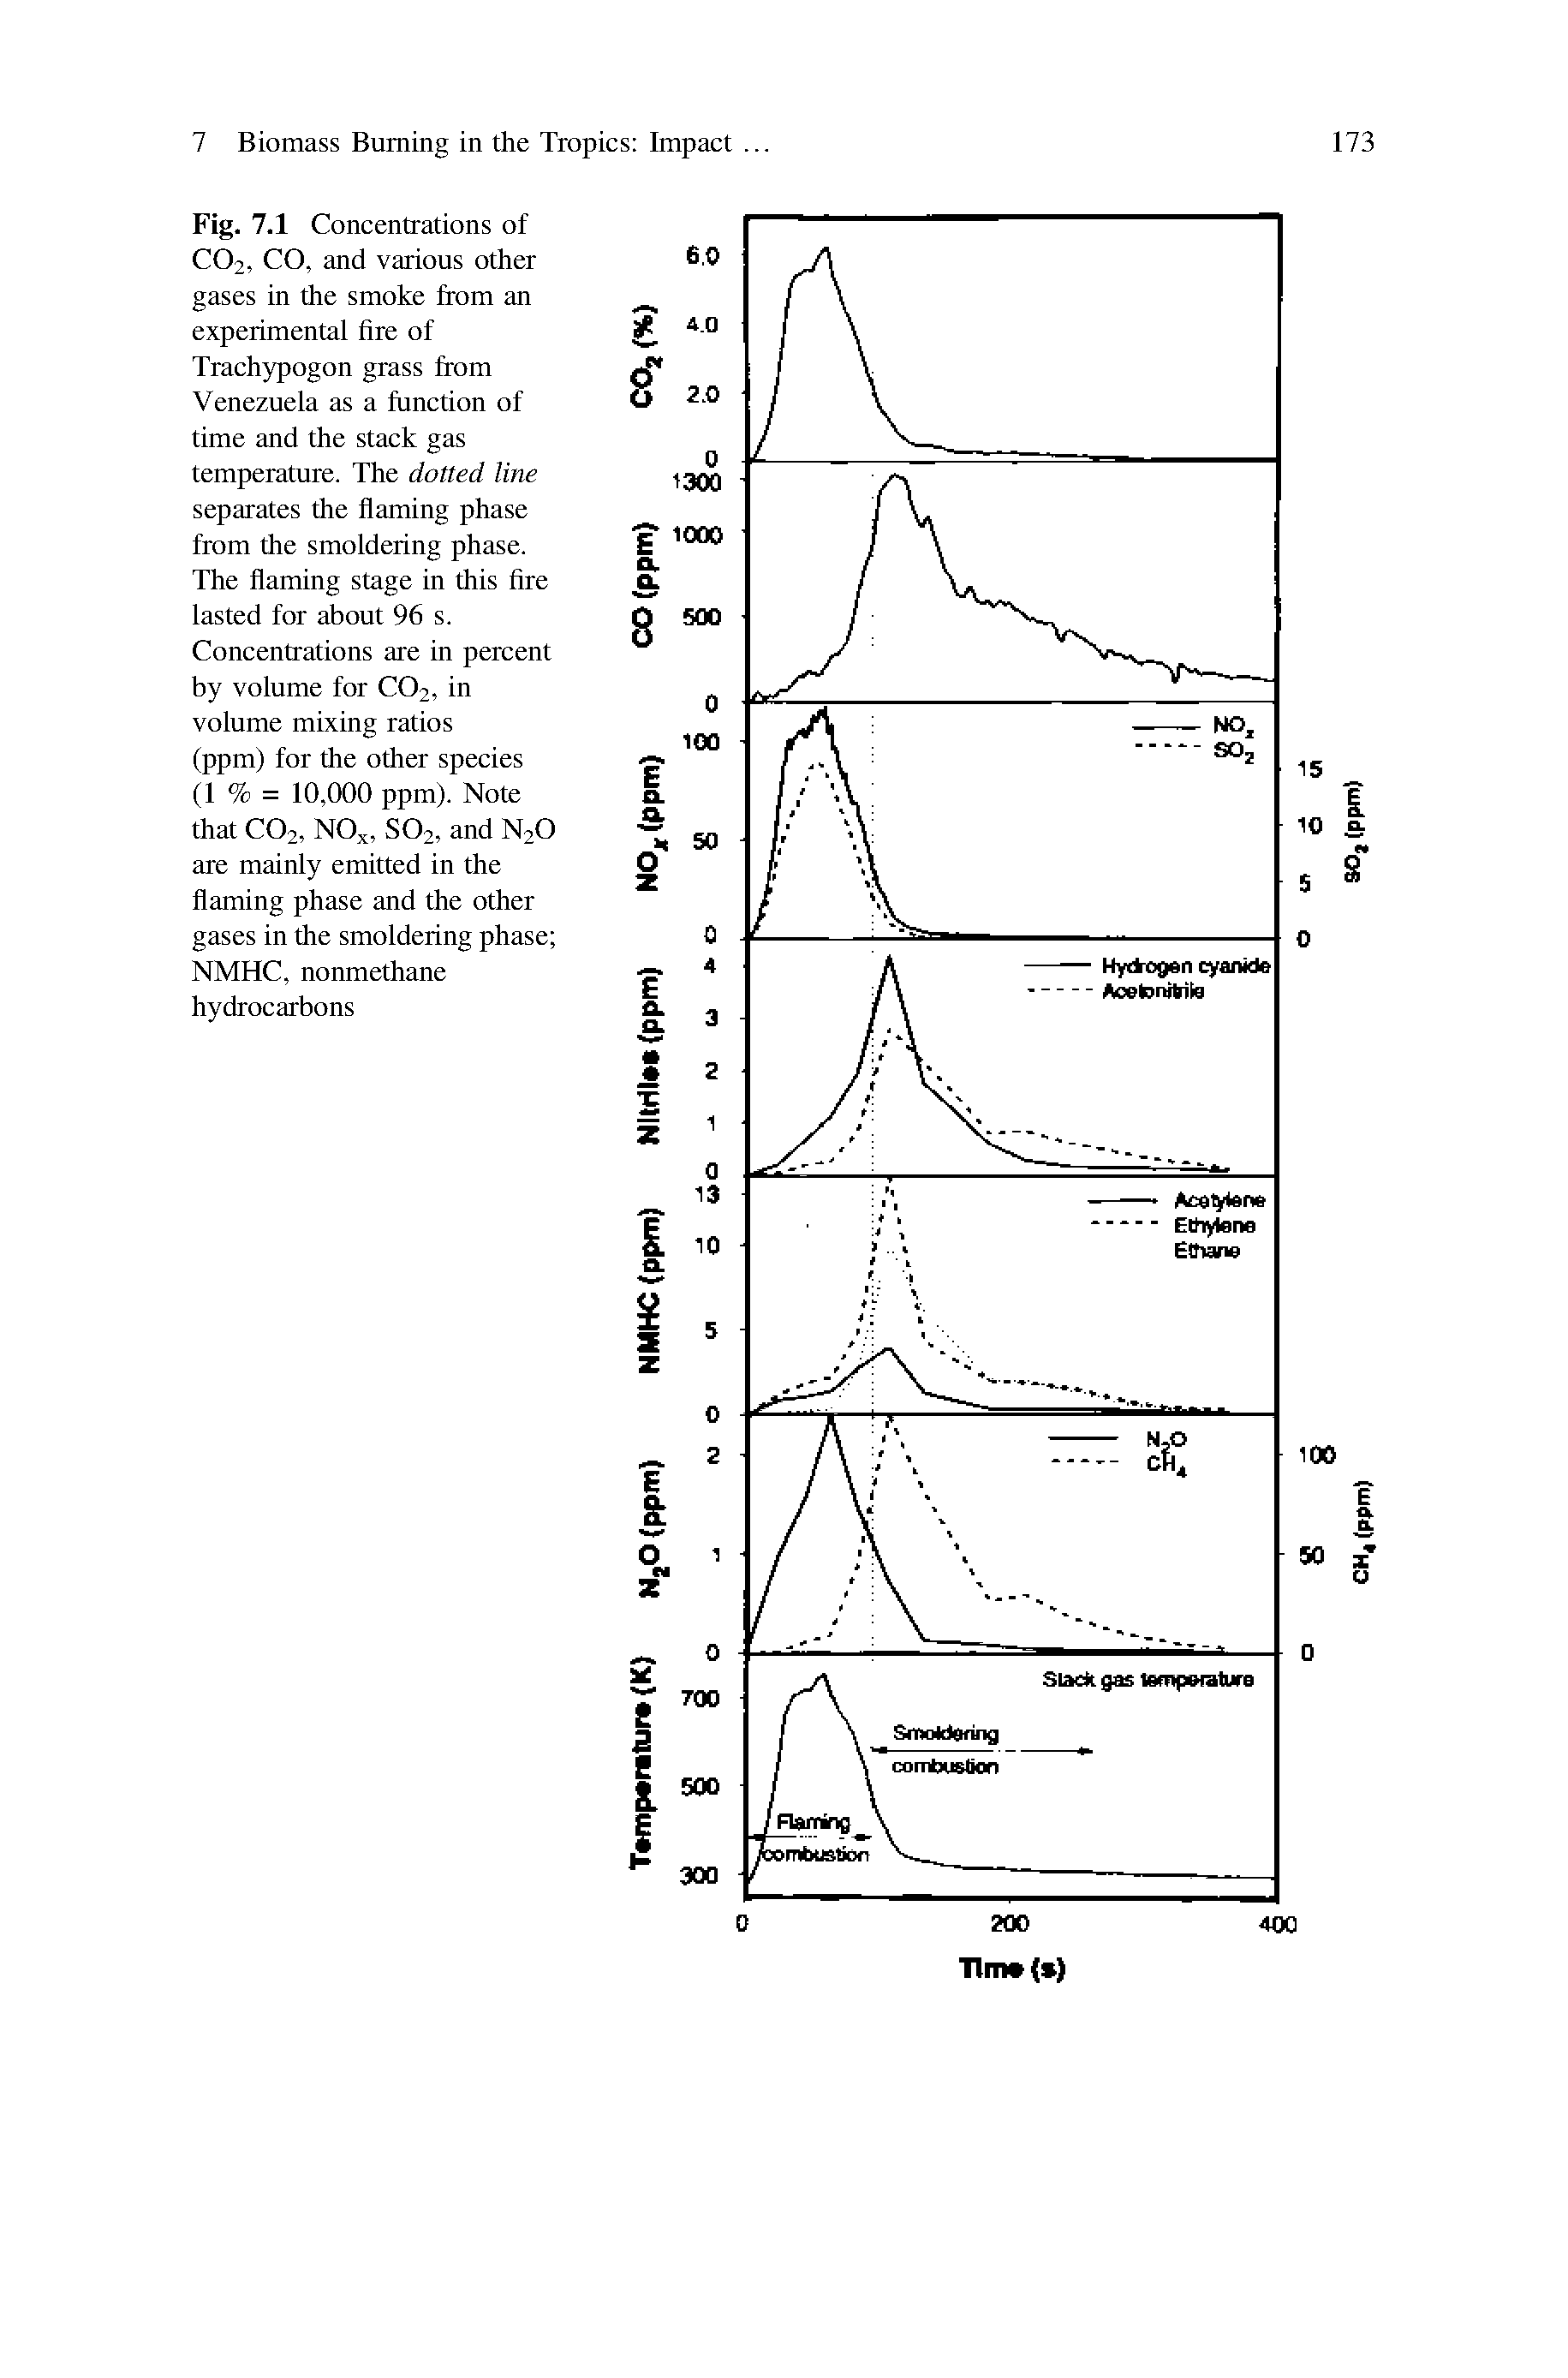 Fig. 7.1 Concentrations of CO2, CO, and various other gases in the smoke from an experimental fire of Trachypogon grass from Venezuela as a function of time and the stack gas temperature. The dotted line separates the flaming phase from the smoldering phase. The flaming stage in this fire lasted for about 96 s. Concentrations are in percent by volume for CO2, in volume mixing ratios (ppm) for the other species (1 % = 10,000 ppm). Note that CO2, NOx, SO2, and N2O are mainly emitted in the flaming phase and the other gases in the smoldering phase NMHC, nonmethane hydrocarbons...